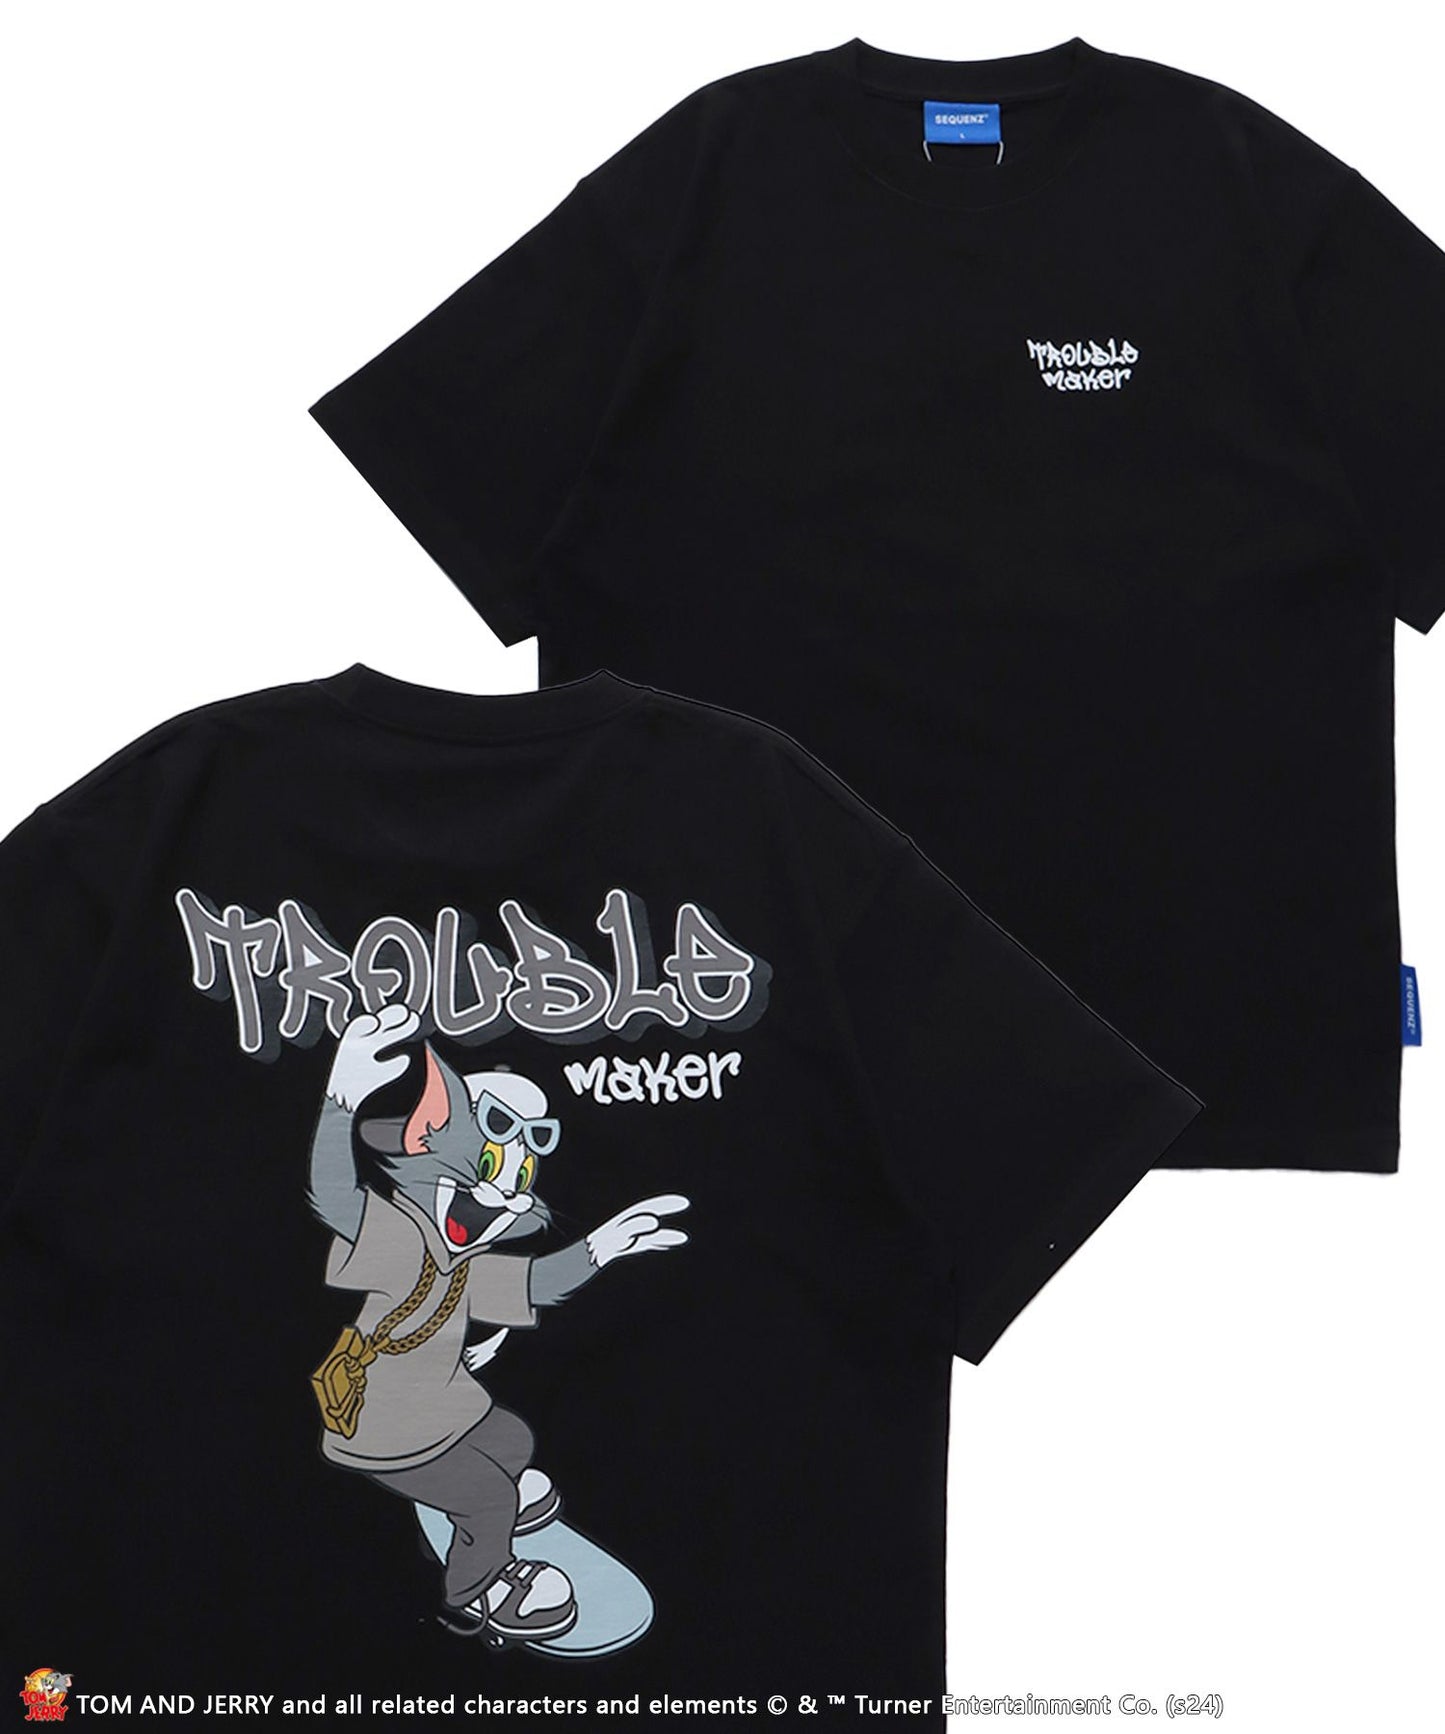 【SEQUENZ（シークエンズ）】TJ 90s SK8 S/S TEE / TOM and JERRY トムジェリ スケート Tシャツ グラフィティ プリント 半袖 ブラック